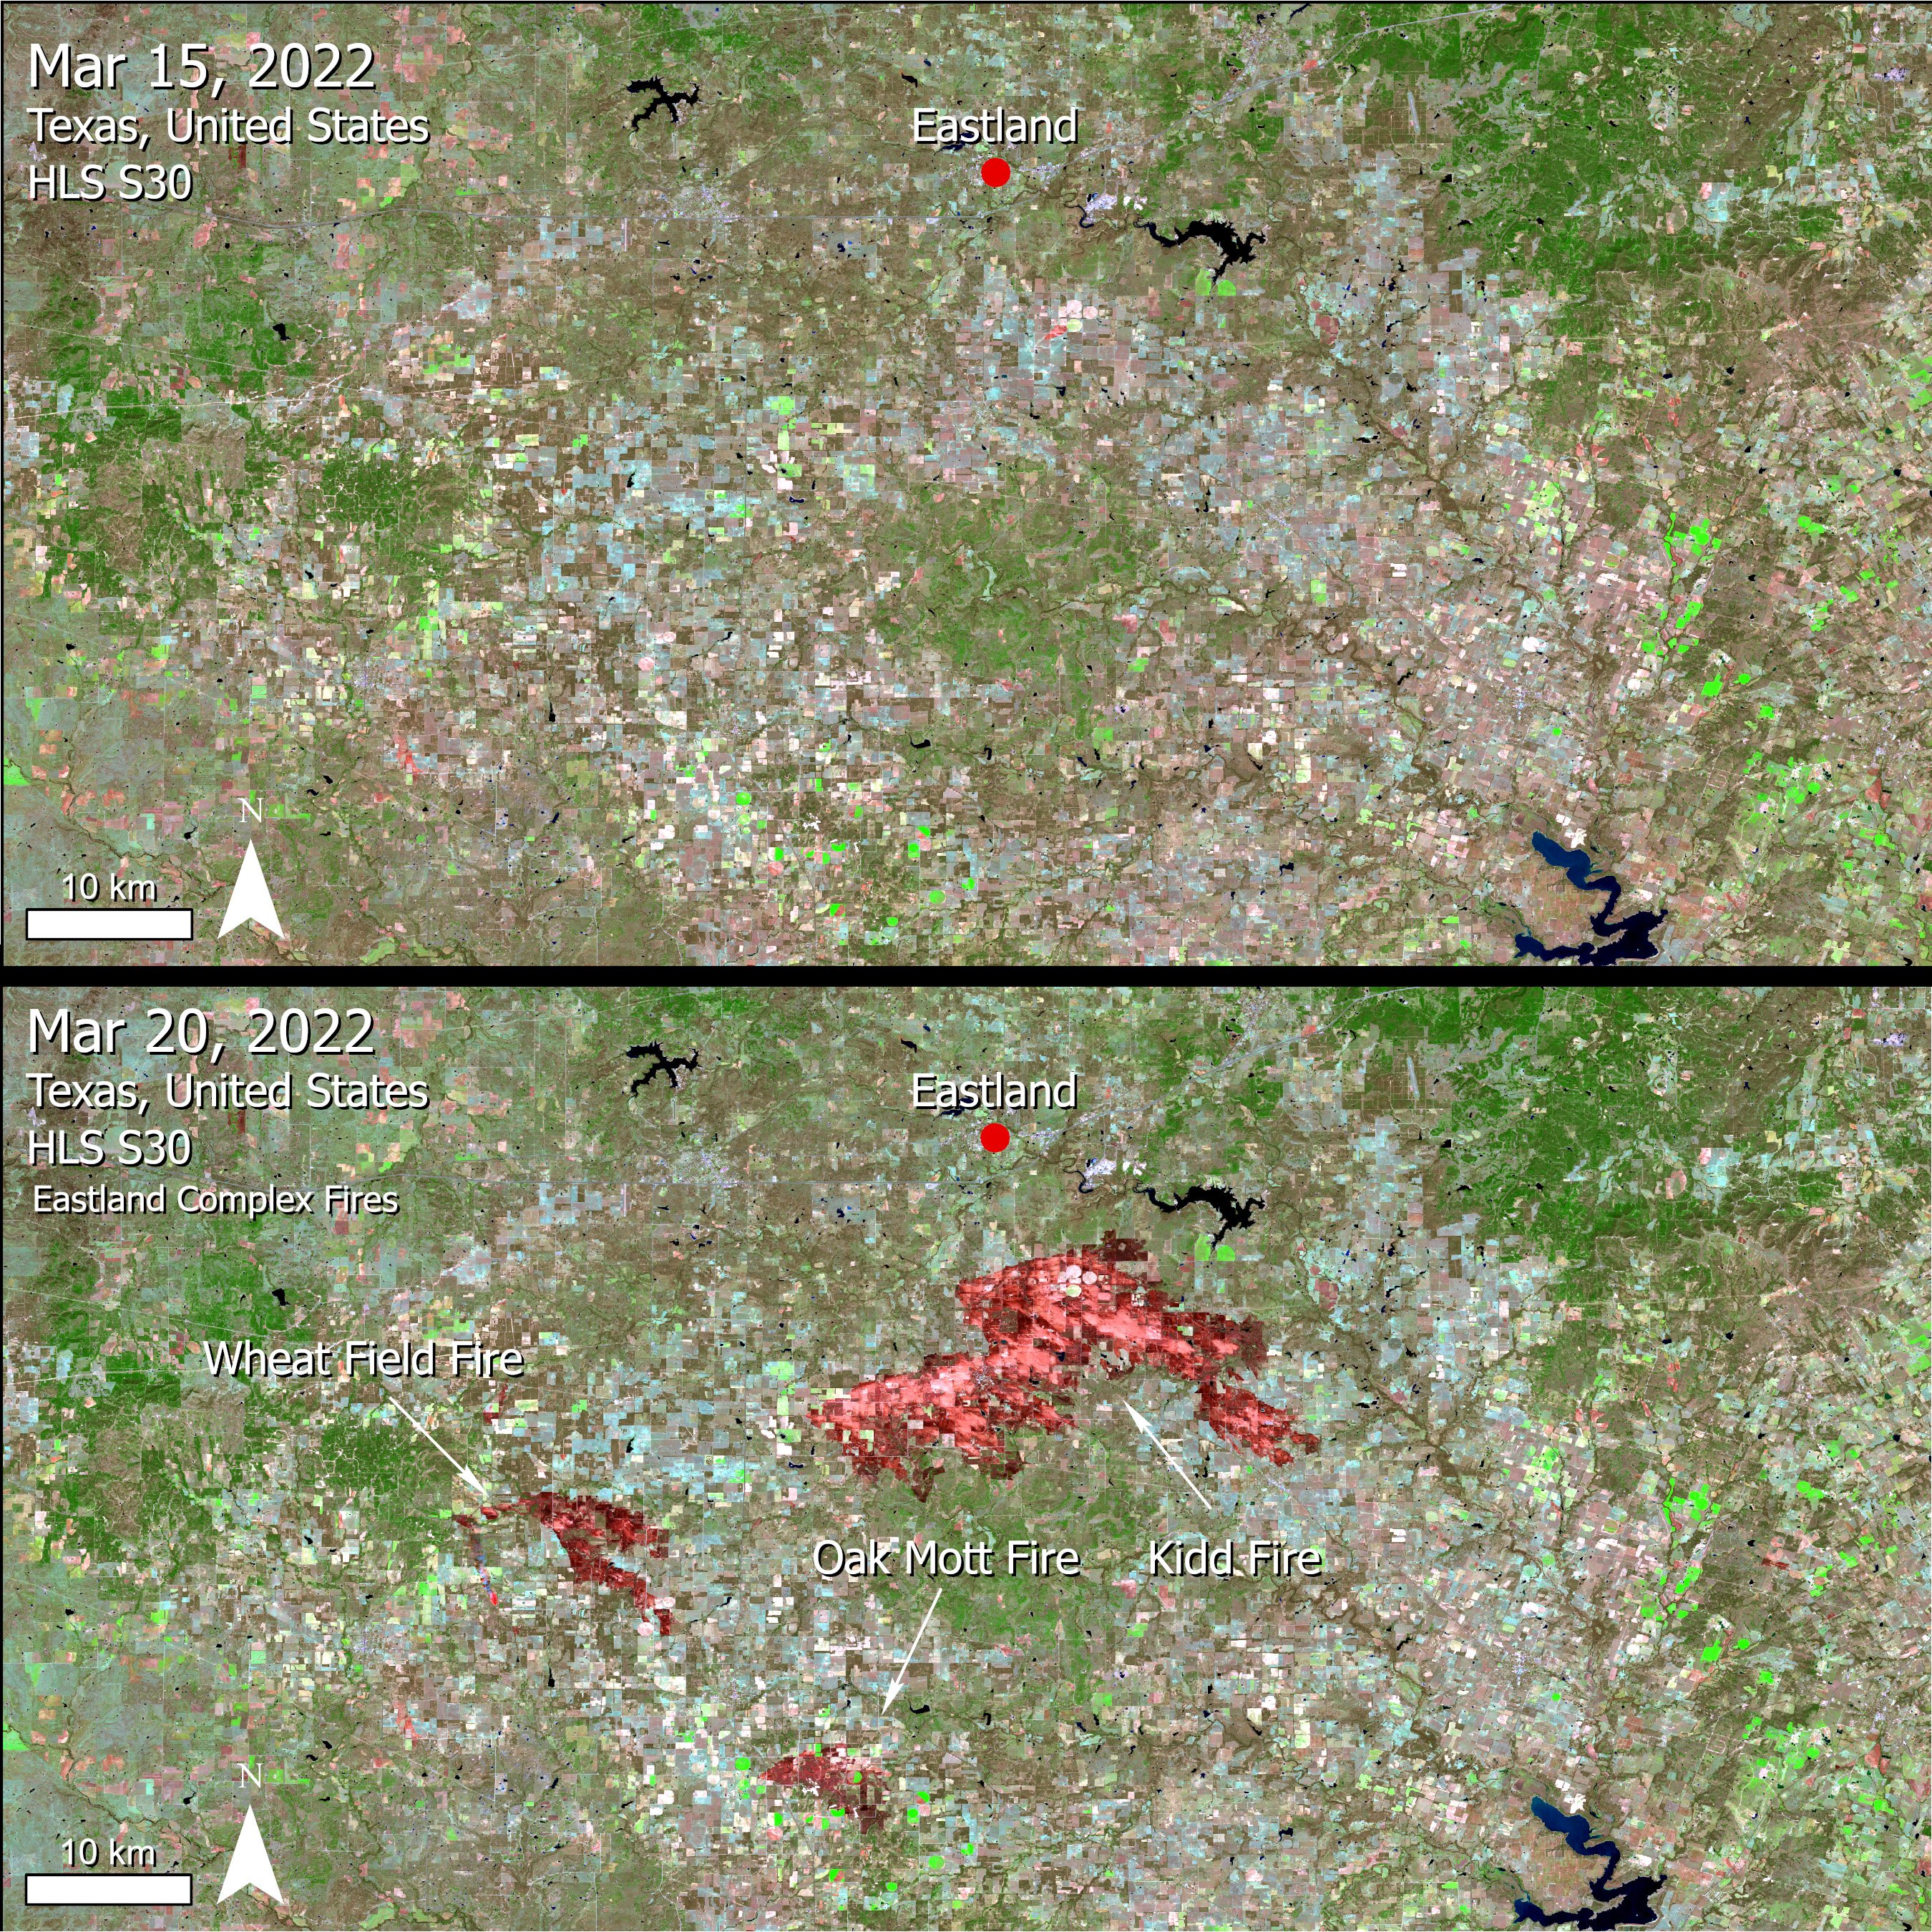 Two images. The top image shows an area near Eastland, Texas before the fires. The bottom image is from 5 days later and shows the large burn scar of the fires.